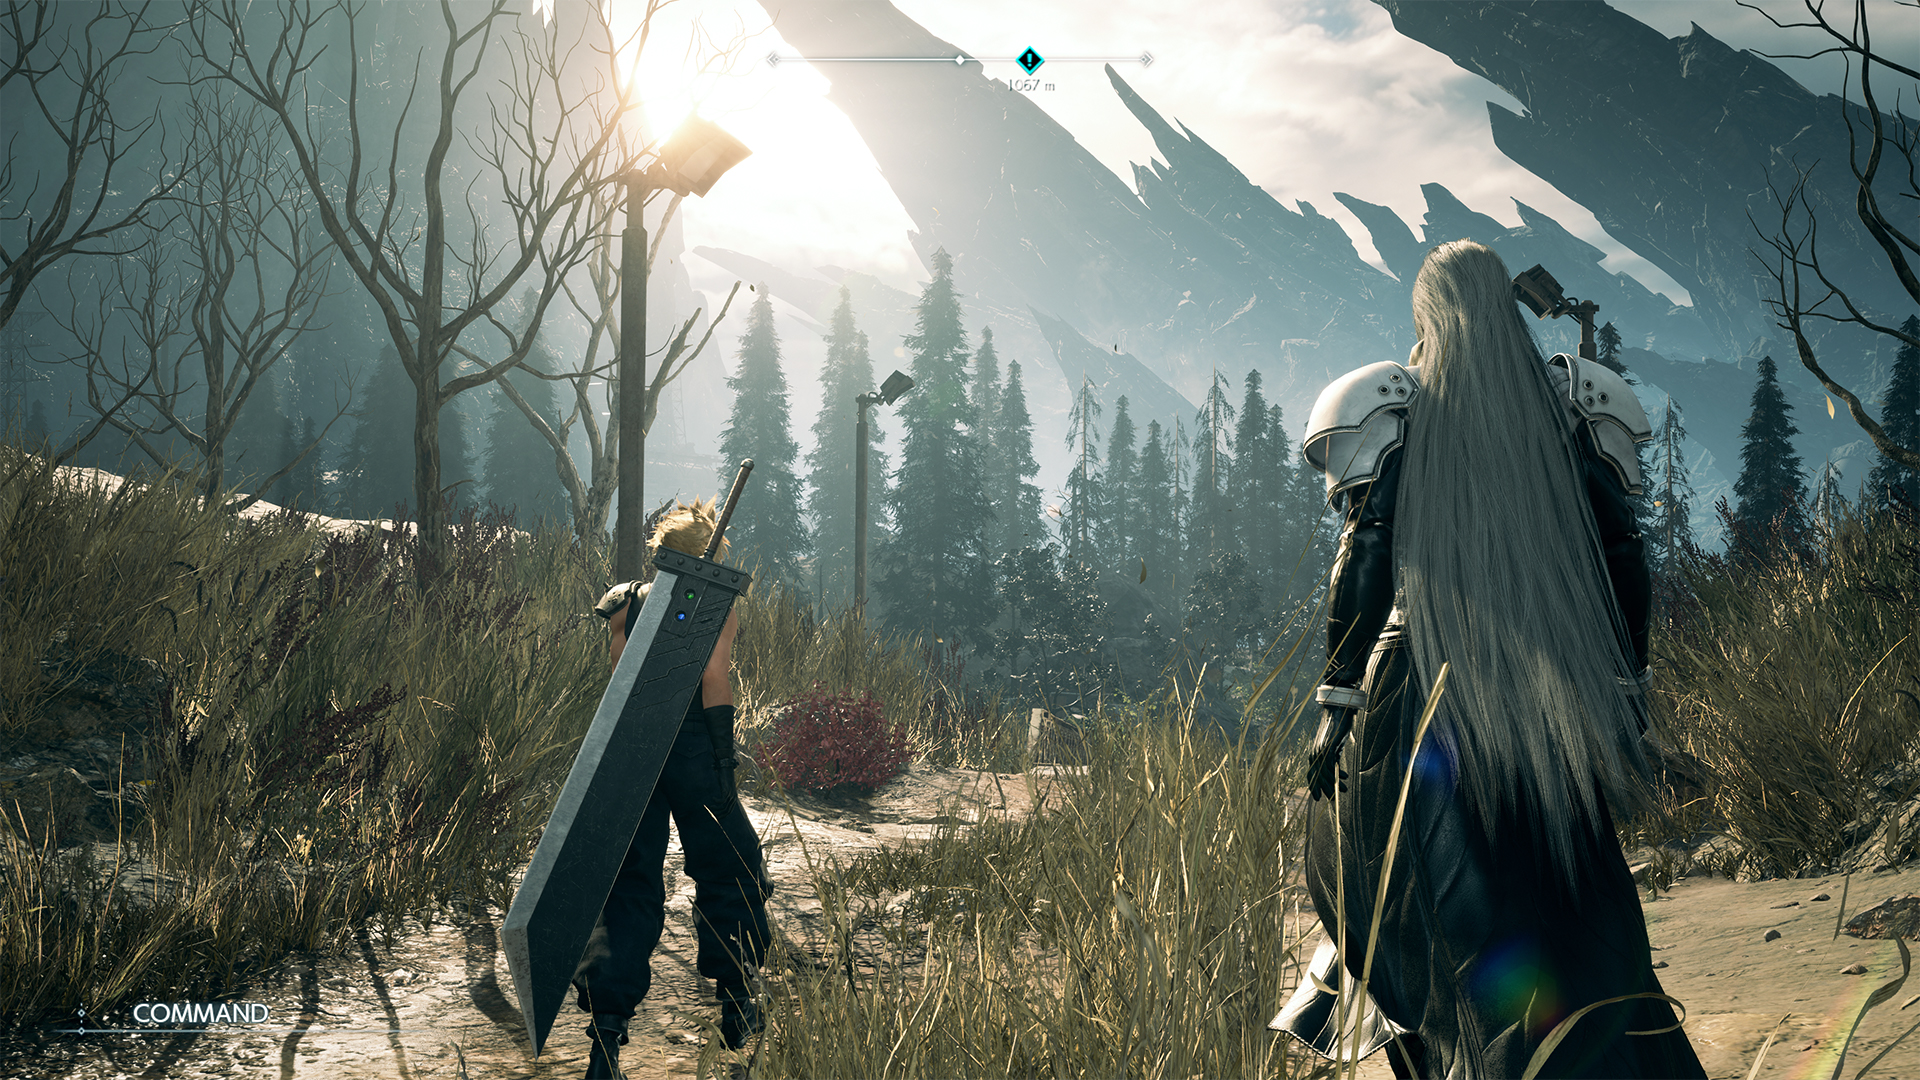 Cloud and Sephiroth walk side by side through a forest landscape